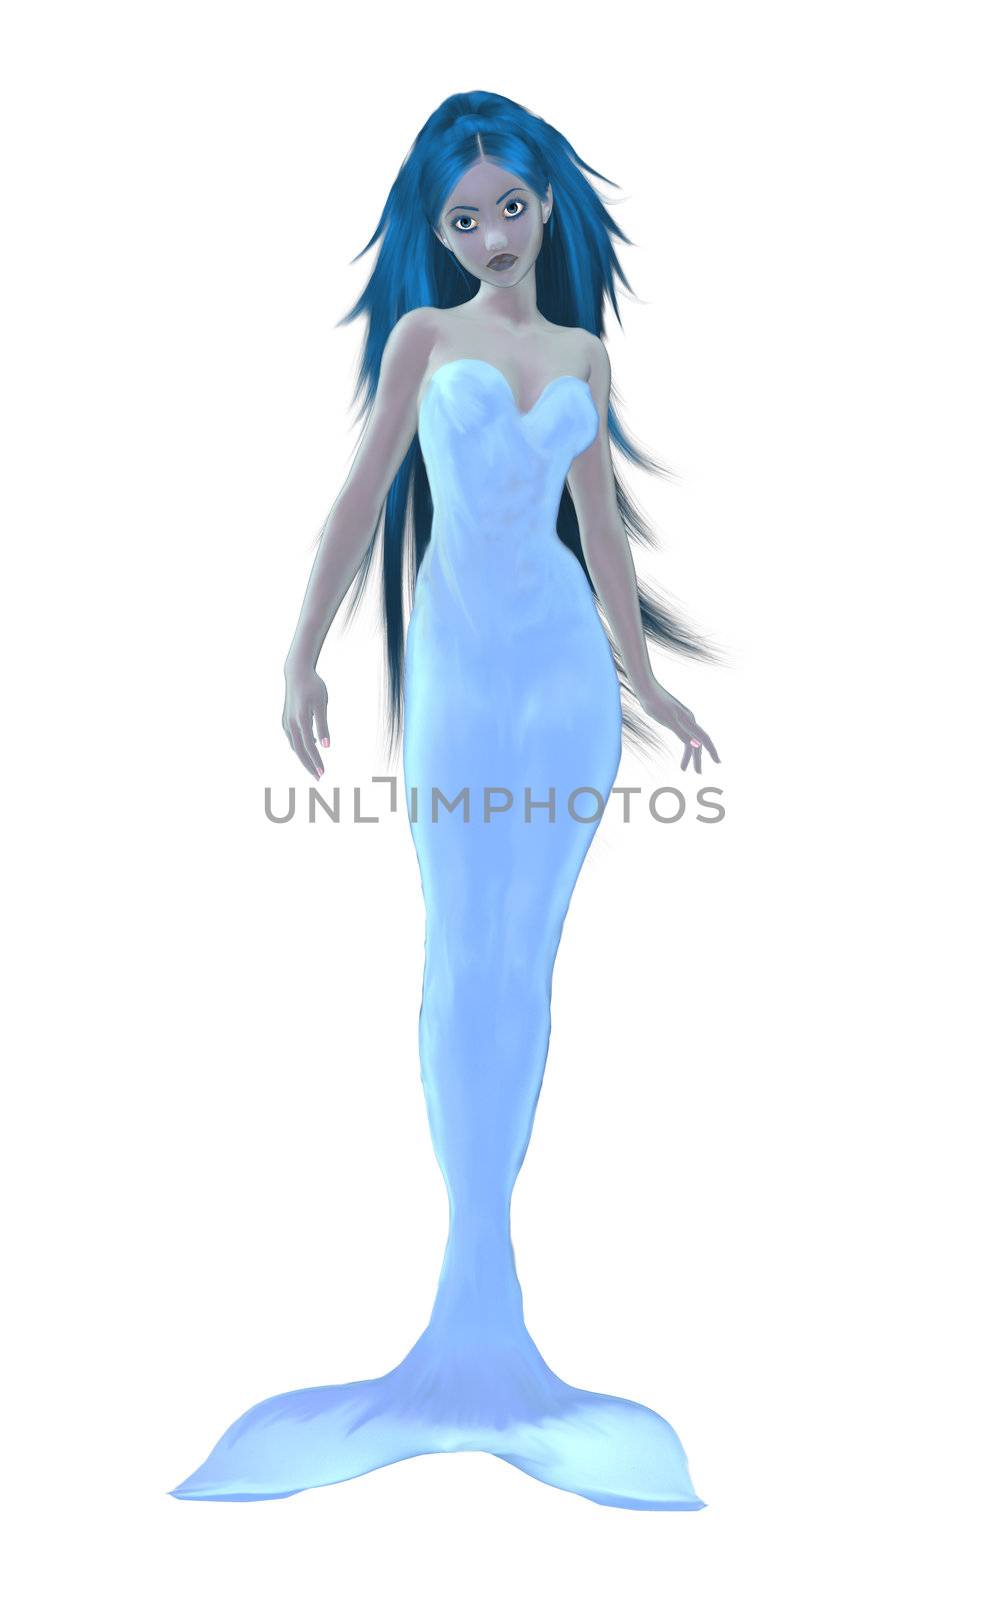 Blue transluscent mermaid with blue hair and eye lashes